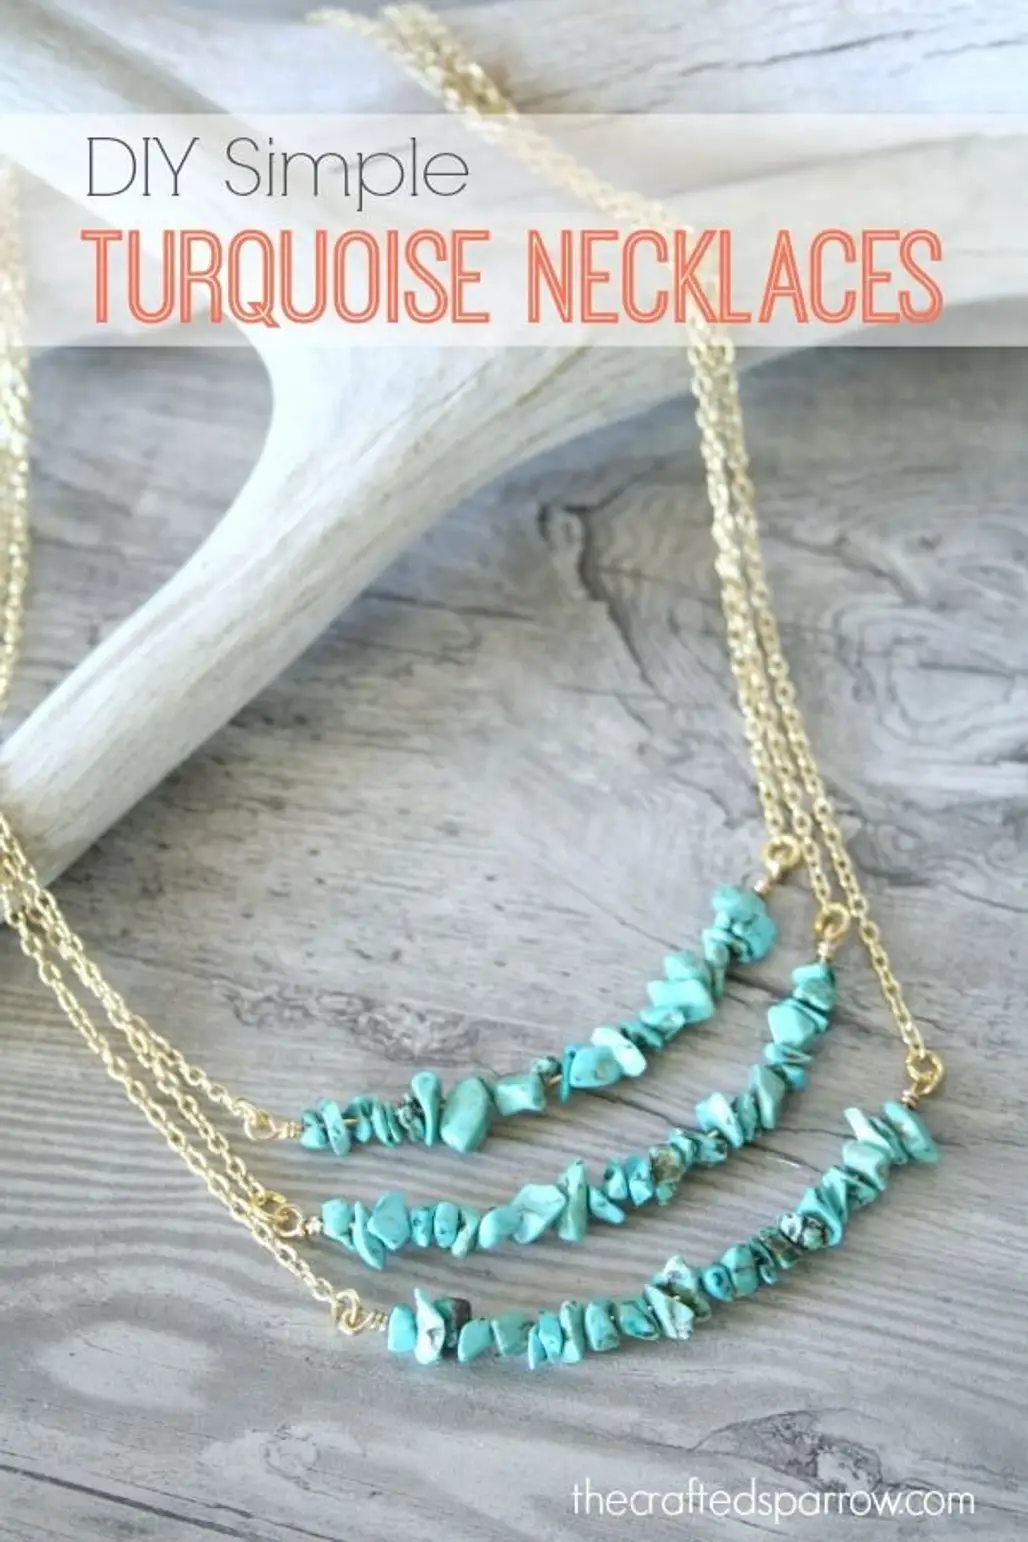 jewellery,necklace,fashion accessory,chain,turquoise,